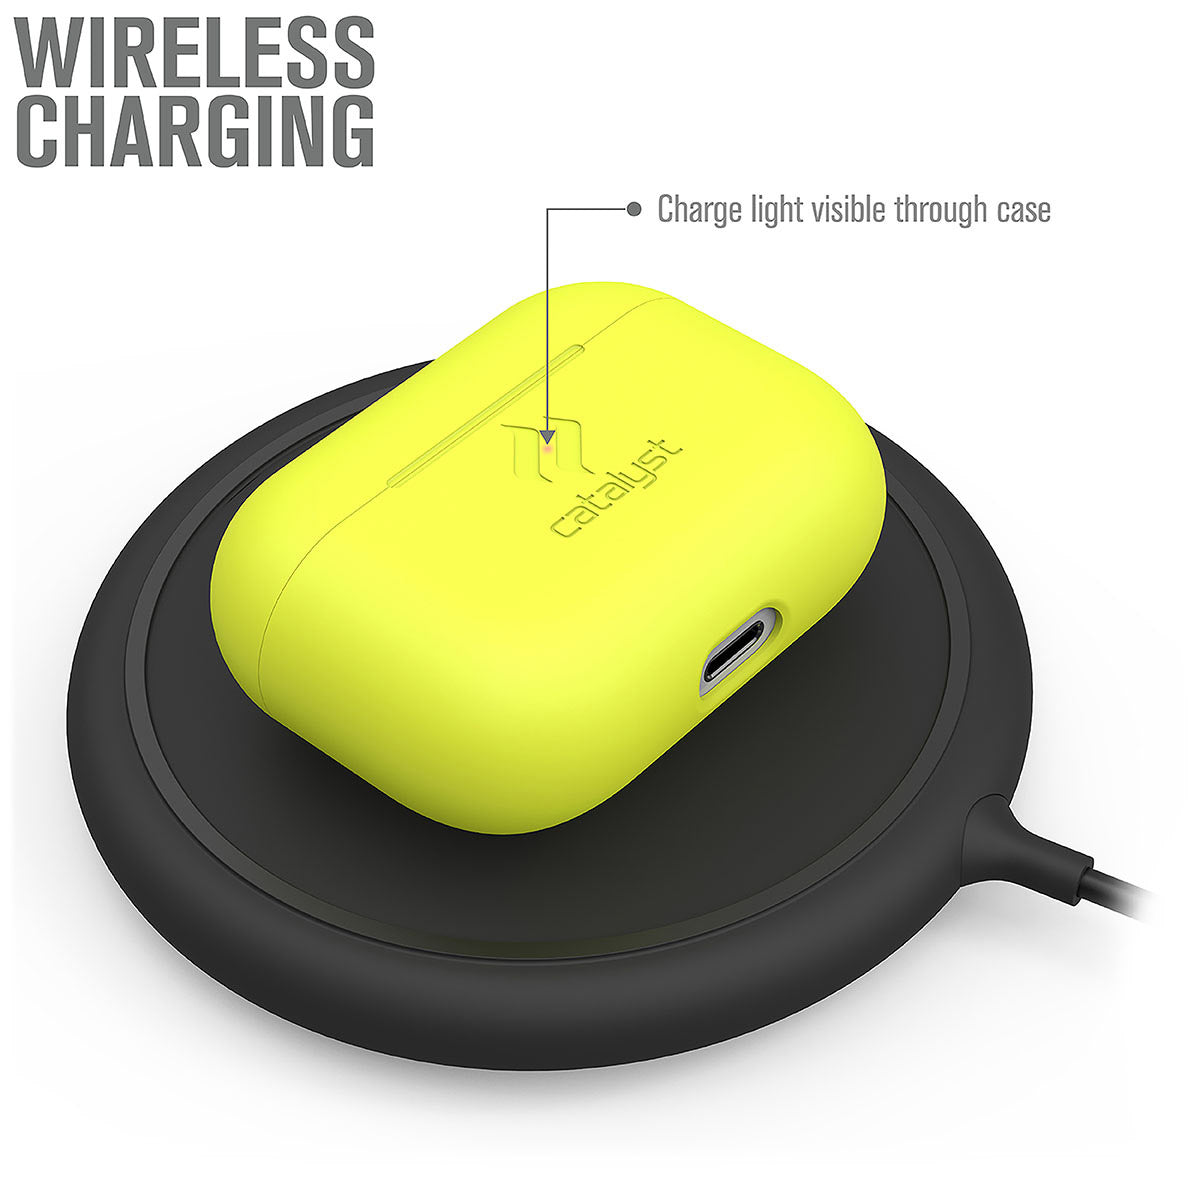 Catalyst airpods pro gen 2/1 slim case showing wireless charging of the case in a neon yellow colorway